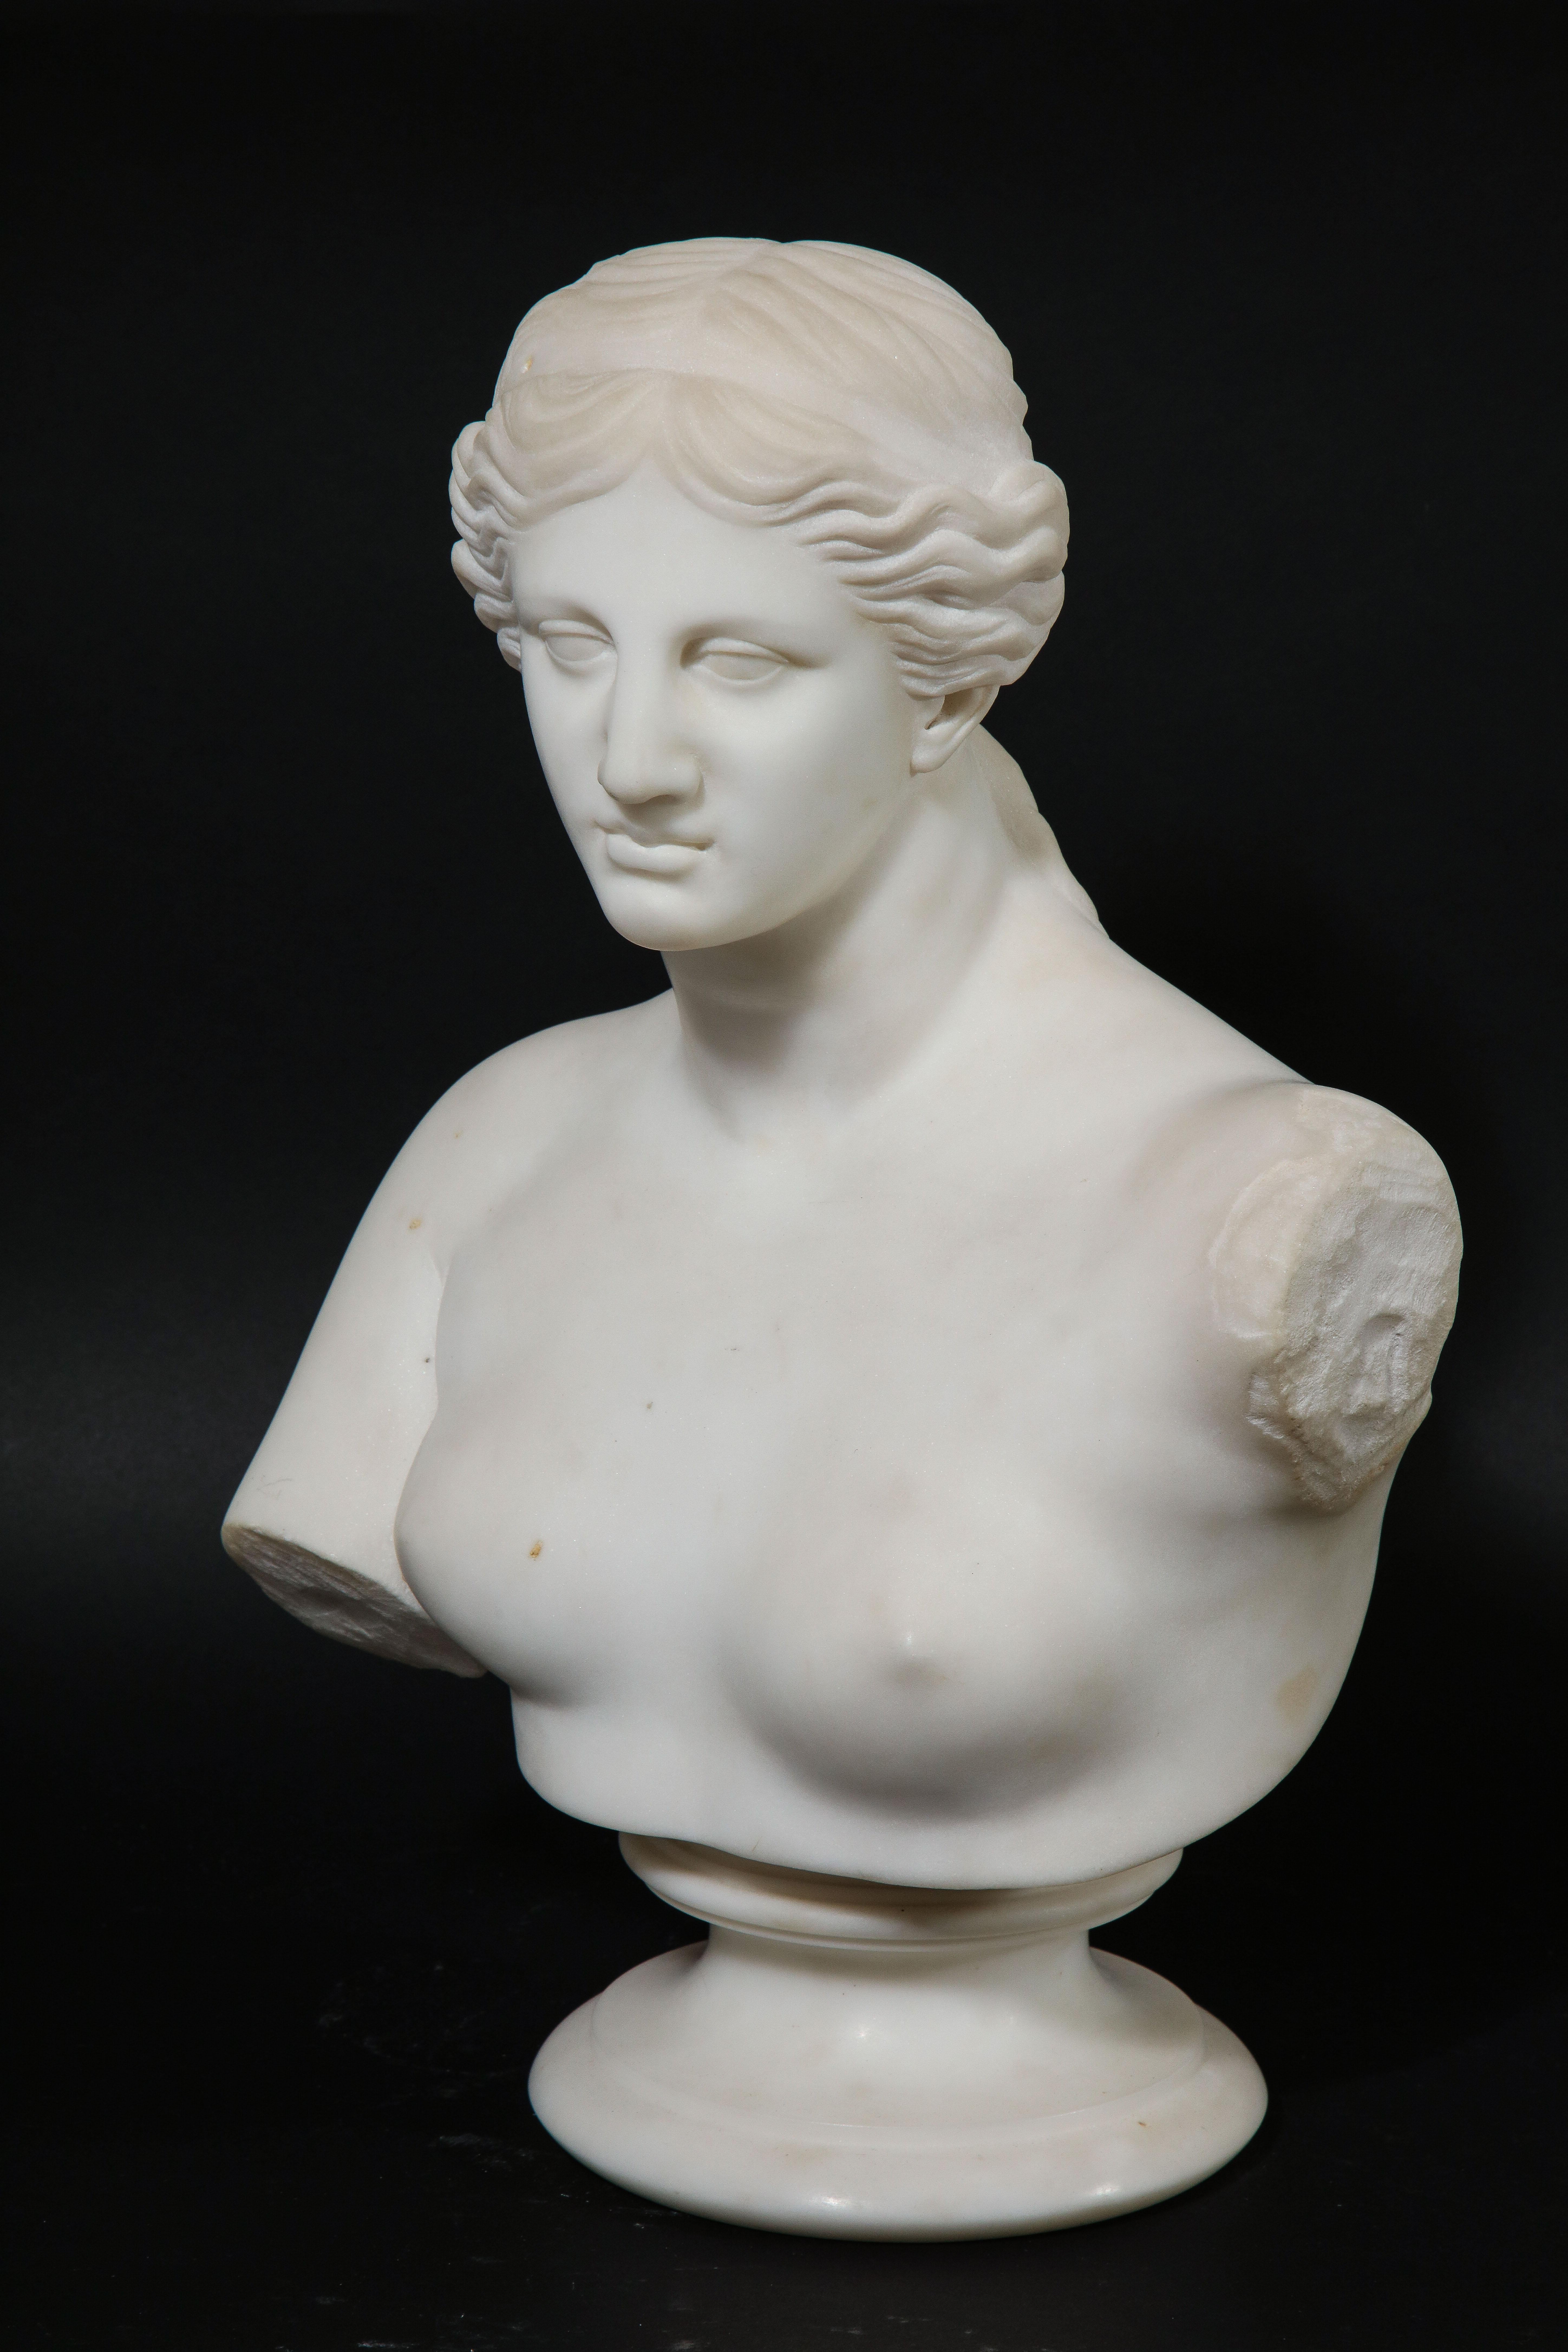 A fabulously hand carved antique neoclassical style Italian Carrara marble bust of Daphne. This bust is of immaculate quality and craftsmanship. Daphne's hair is beautifully hand carved with interlocking waves which terminate into a pony-tail. She